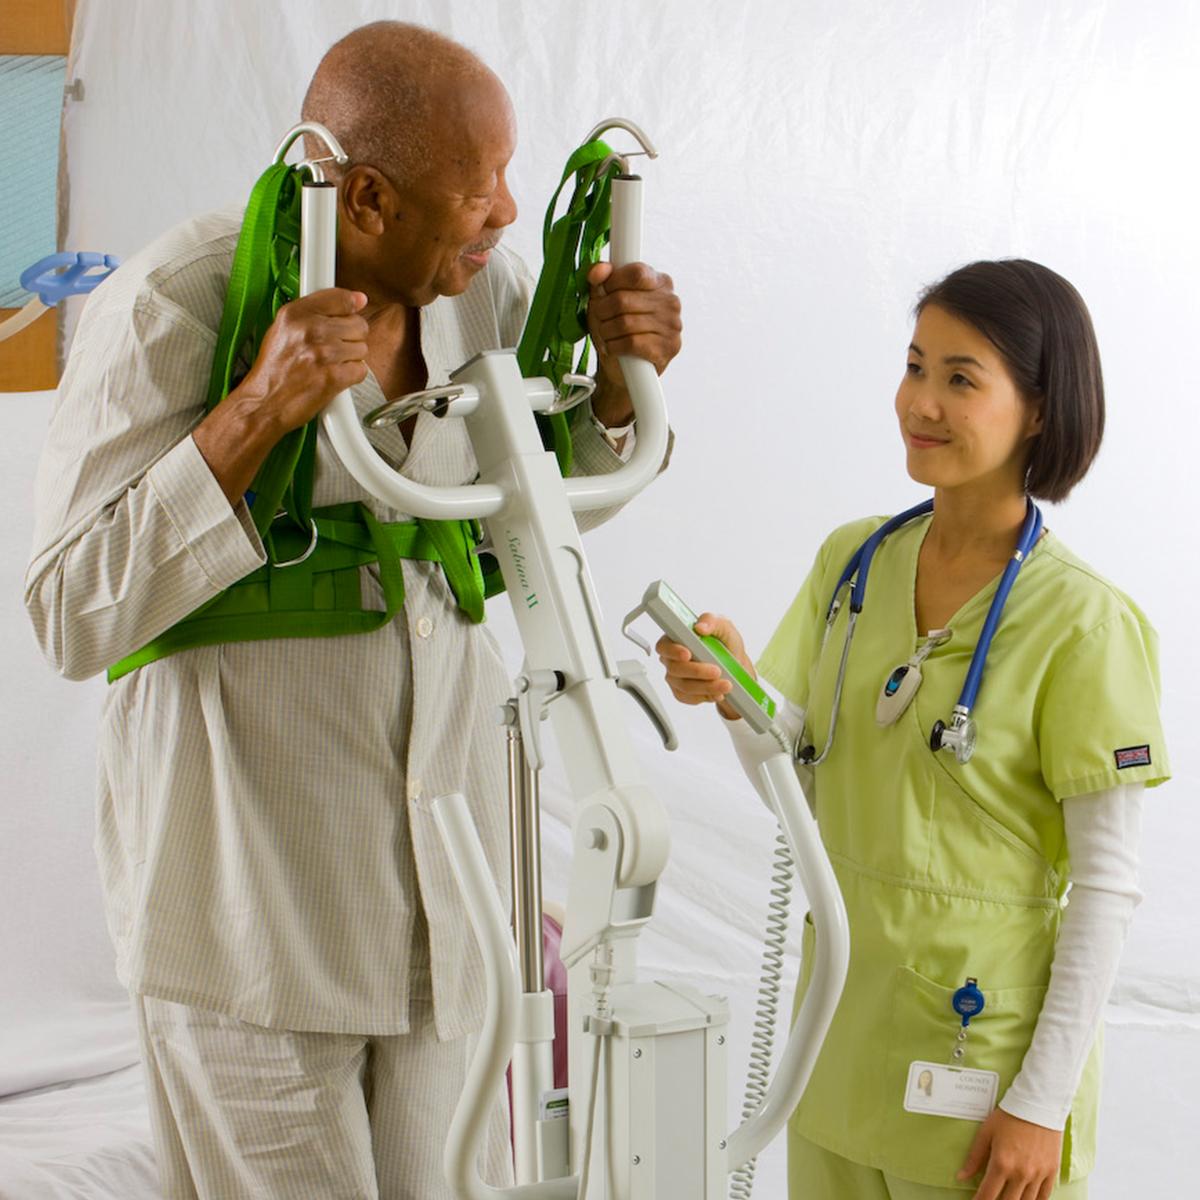 A clinician helps an older male patient stand using a Sabina SafetyVest Lift Aid